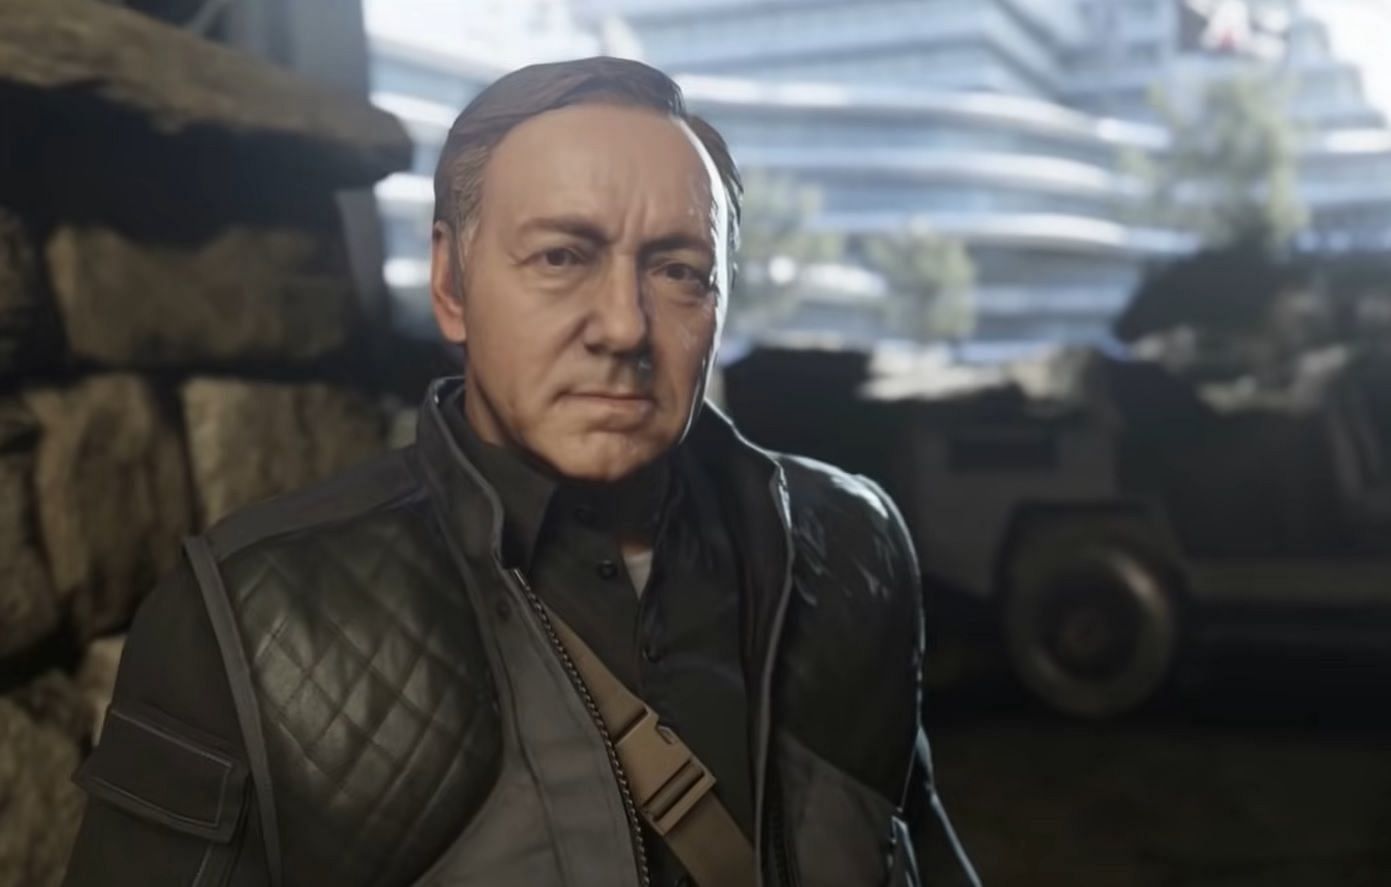 Who is the bad guy in Call of Duty: Advanced Warfare?